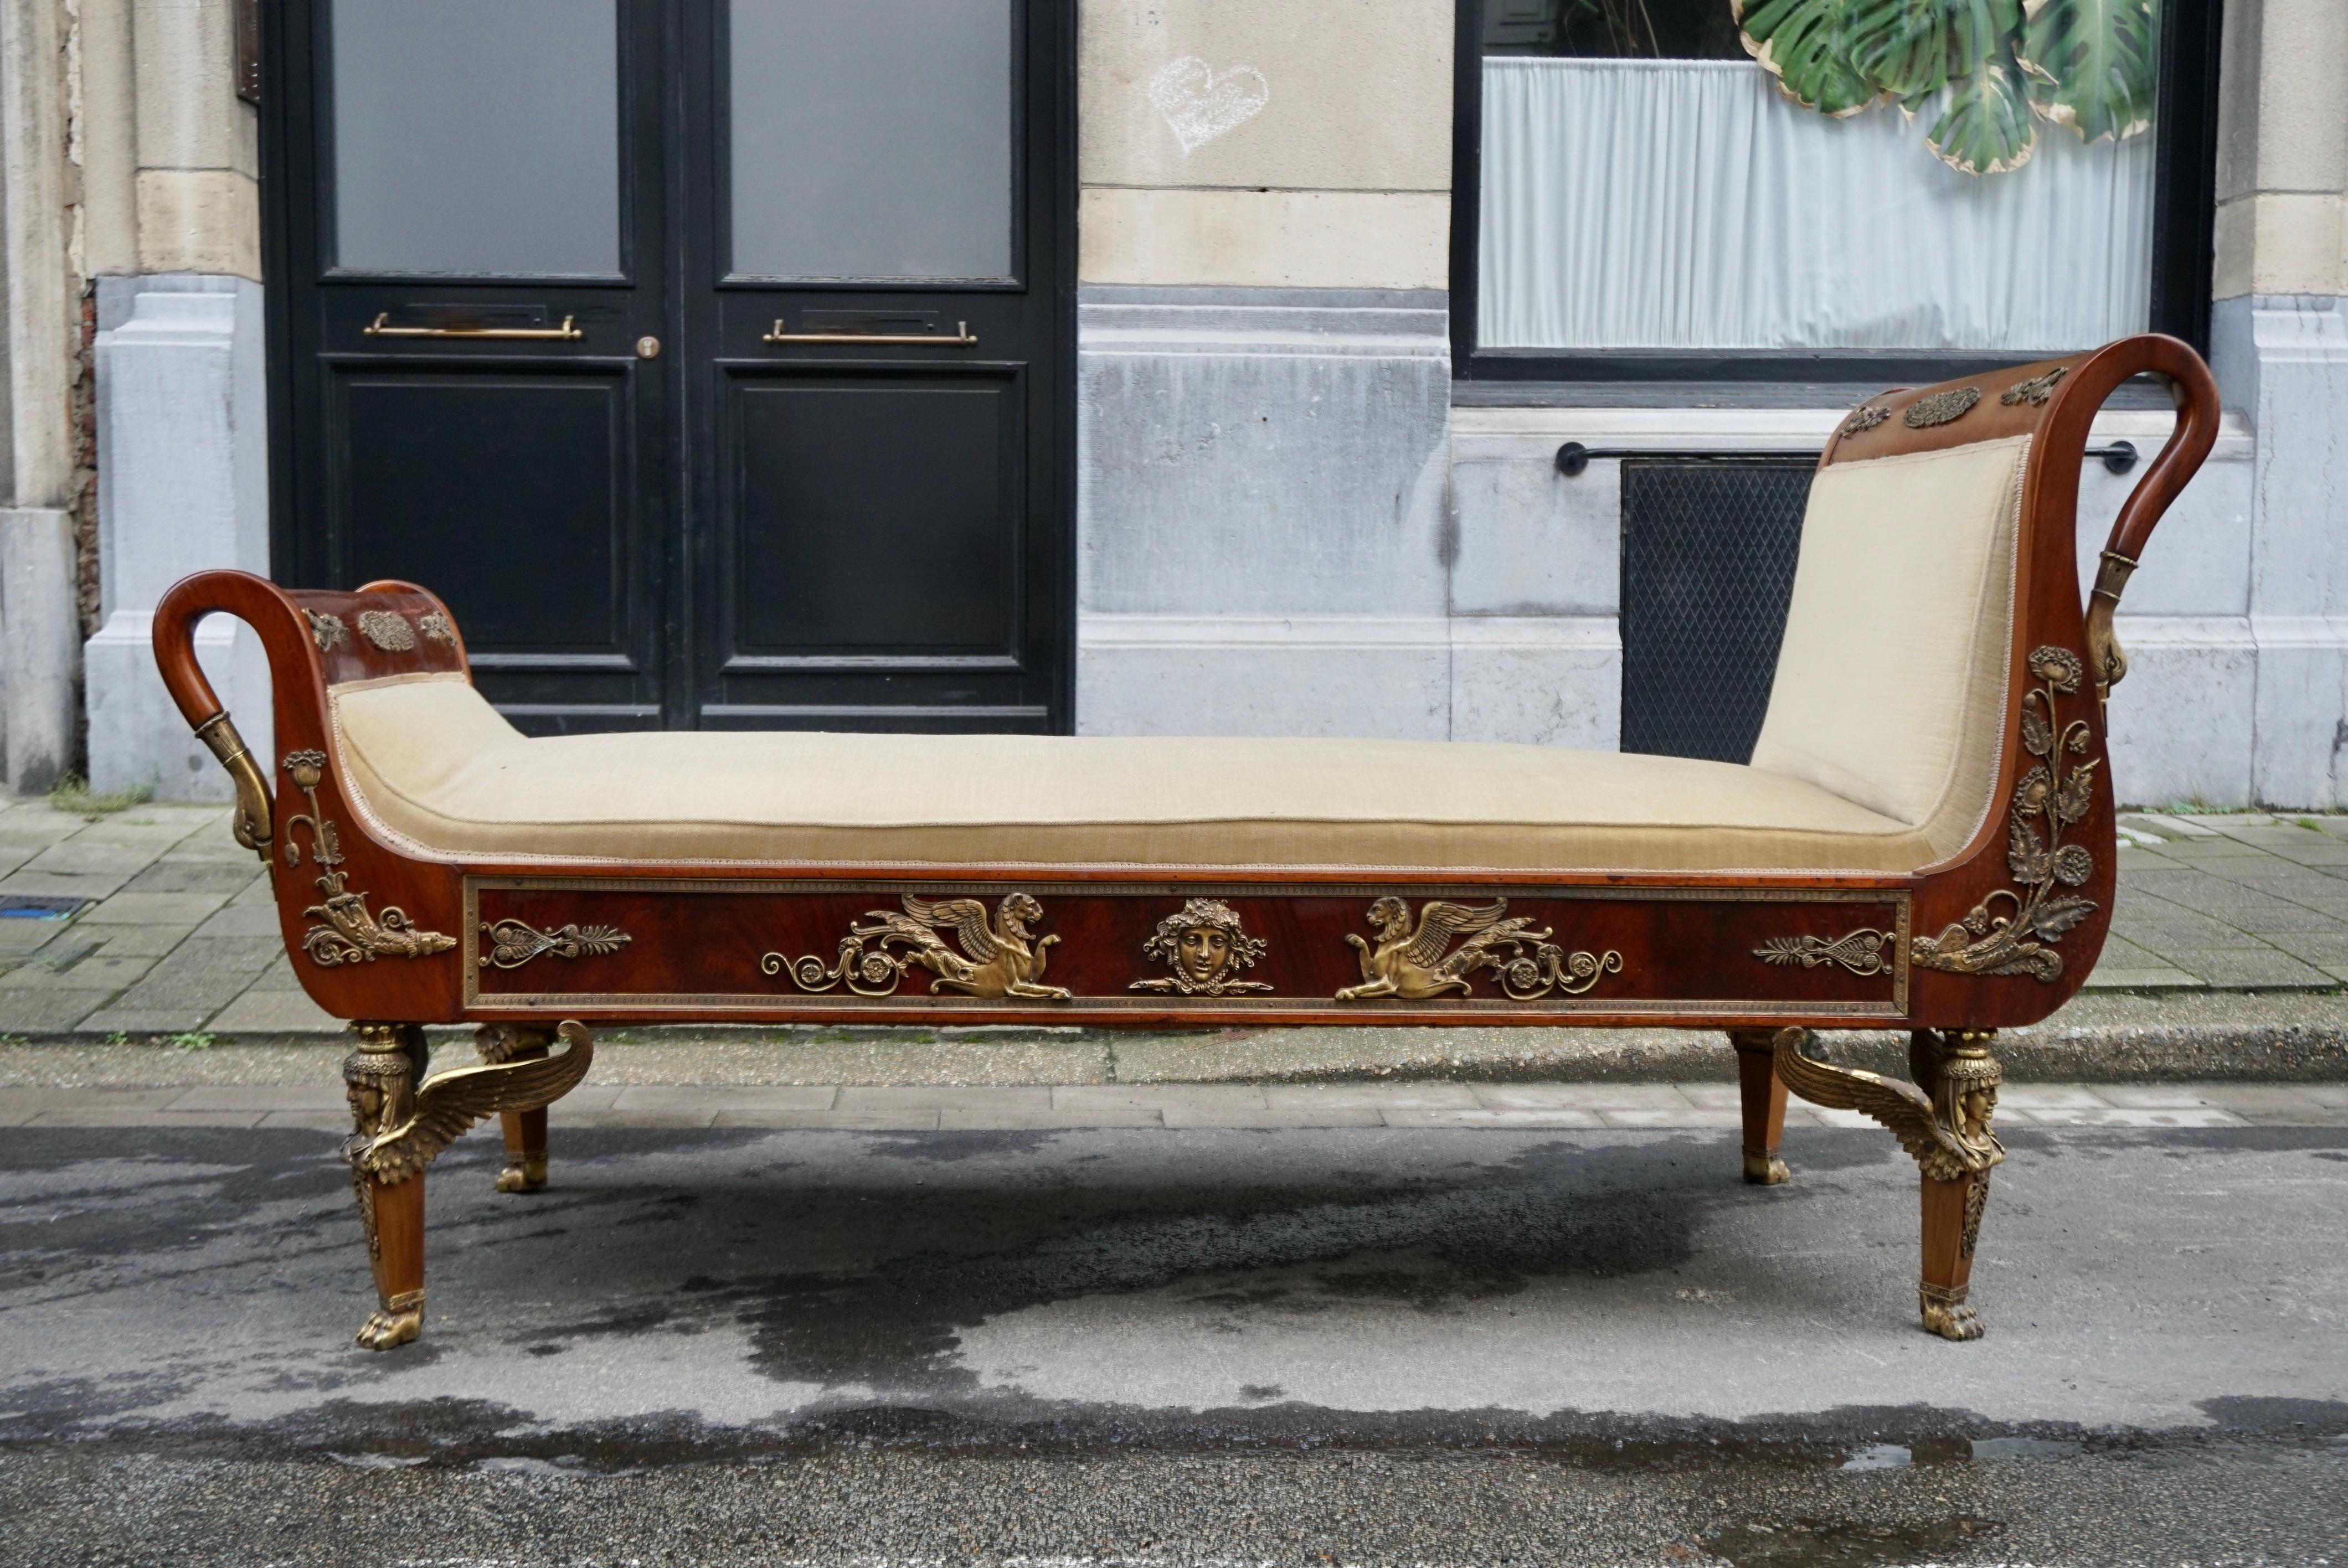 Incredible Gilt Bronze-Mounted Swan Neck Daybed in French Empire Style For Sale 3